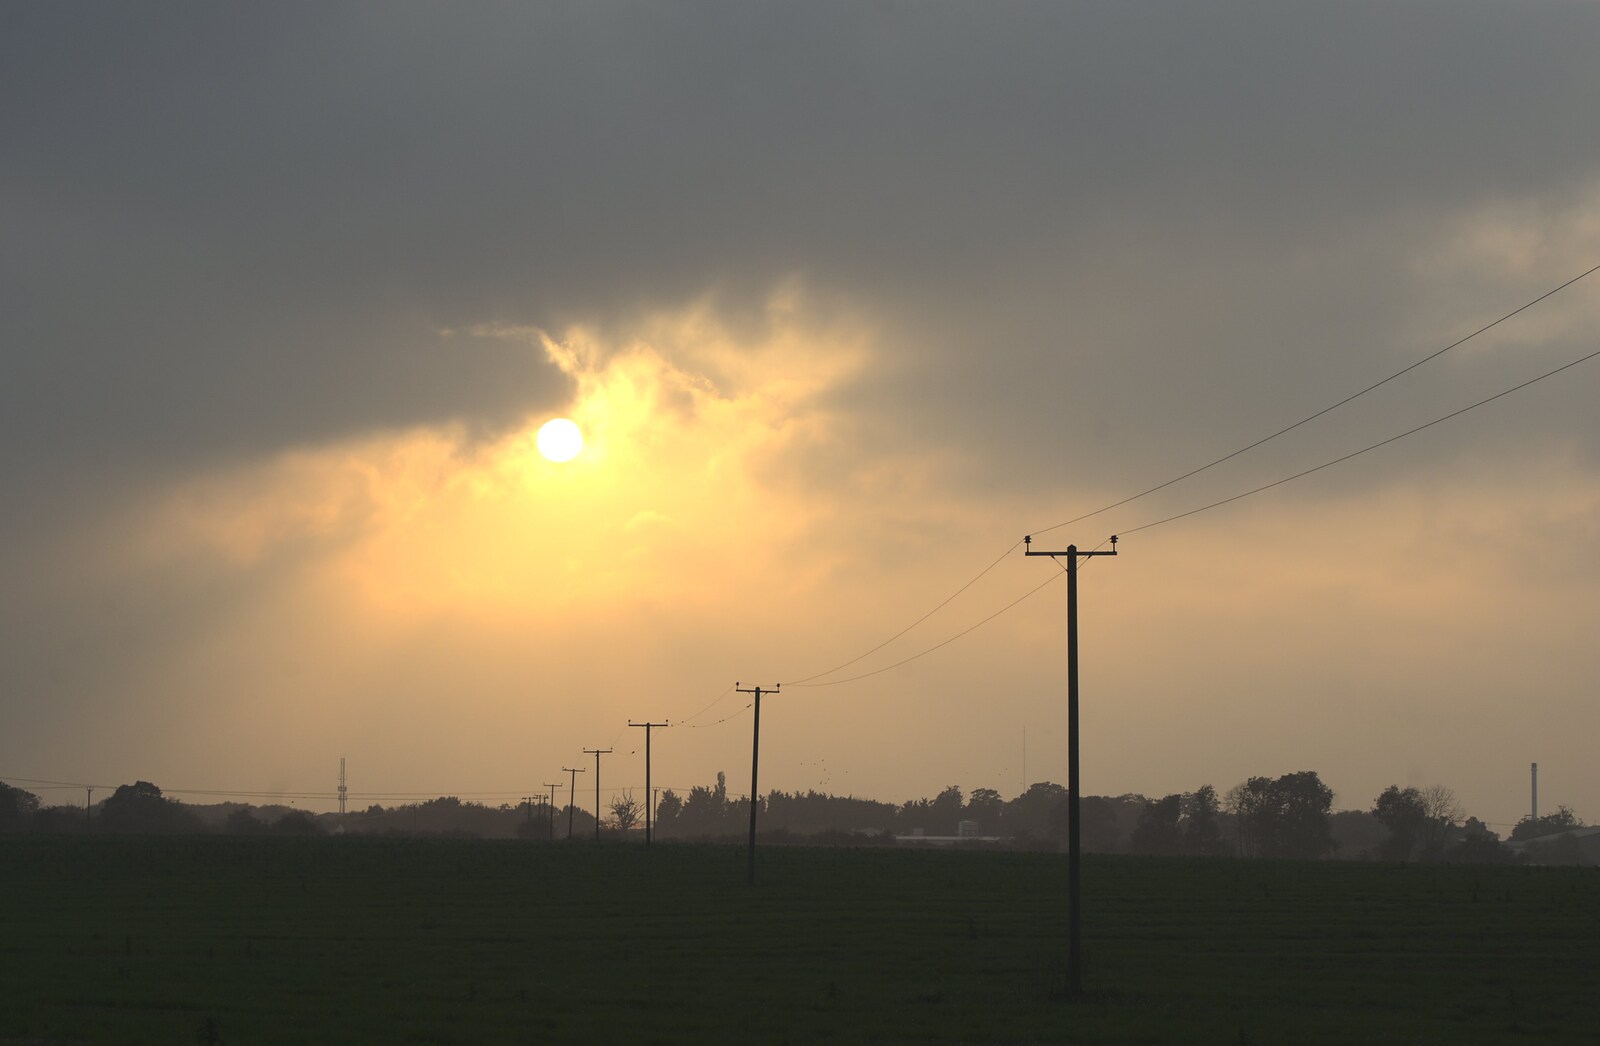 A hazy sun hangs low in the sky from Helicopters on the A14, and a Walk at Thornham, Suffolk - 7th October 2010